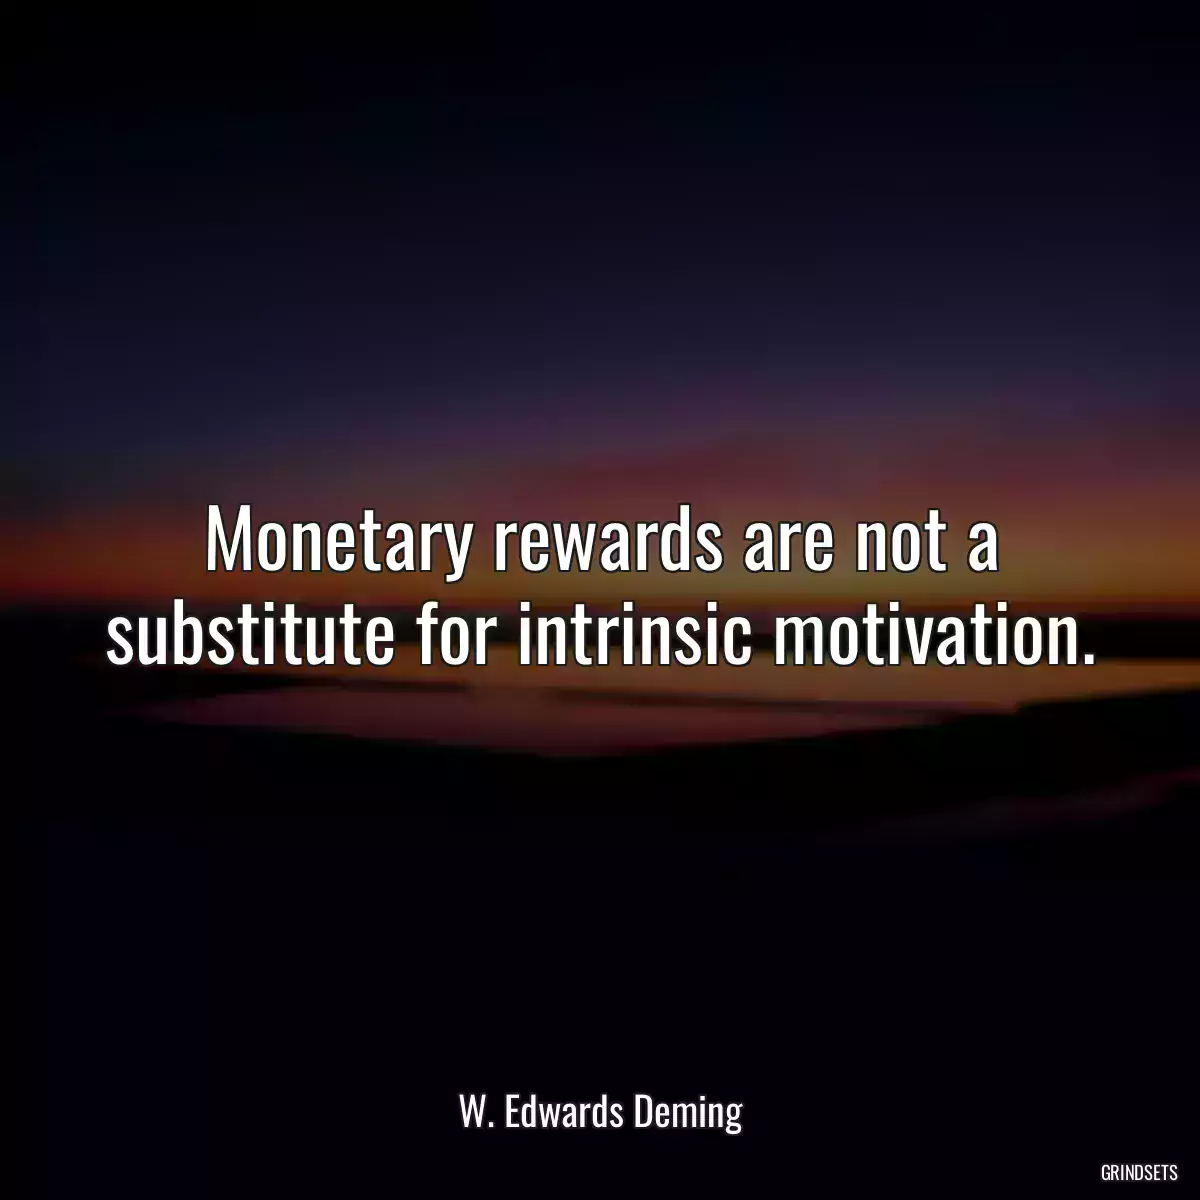 Monetary rewards are not a substitute for intrinsic motivation.